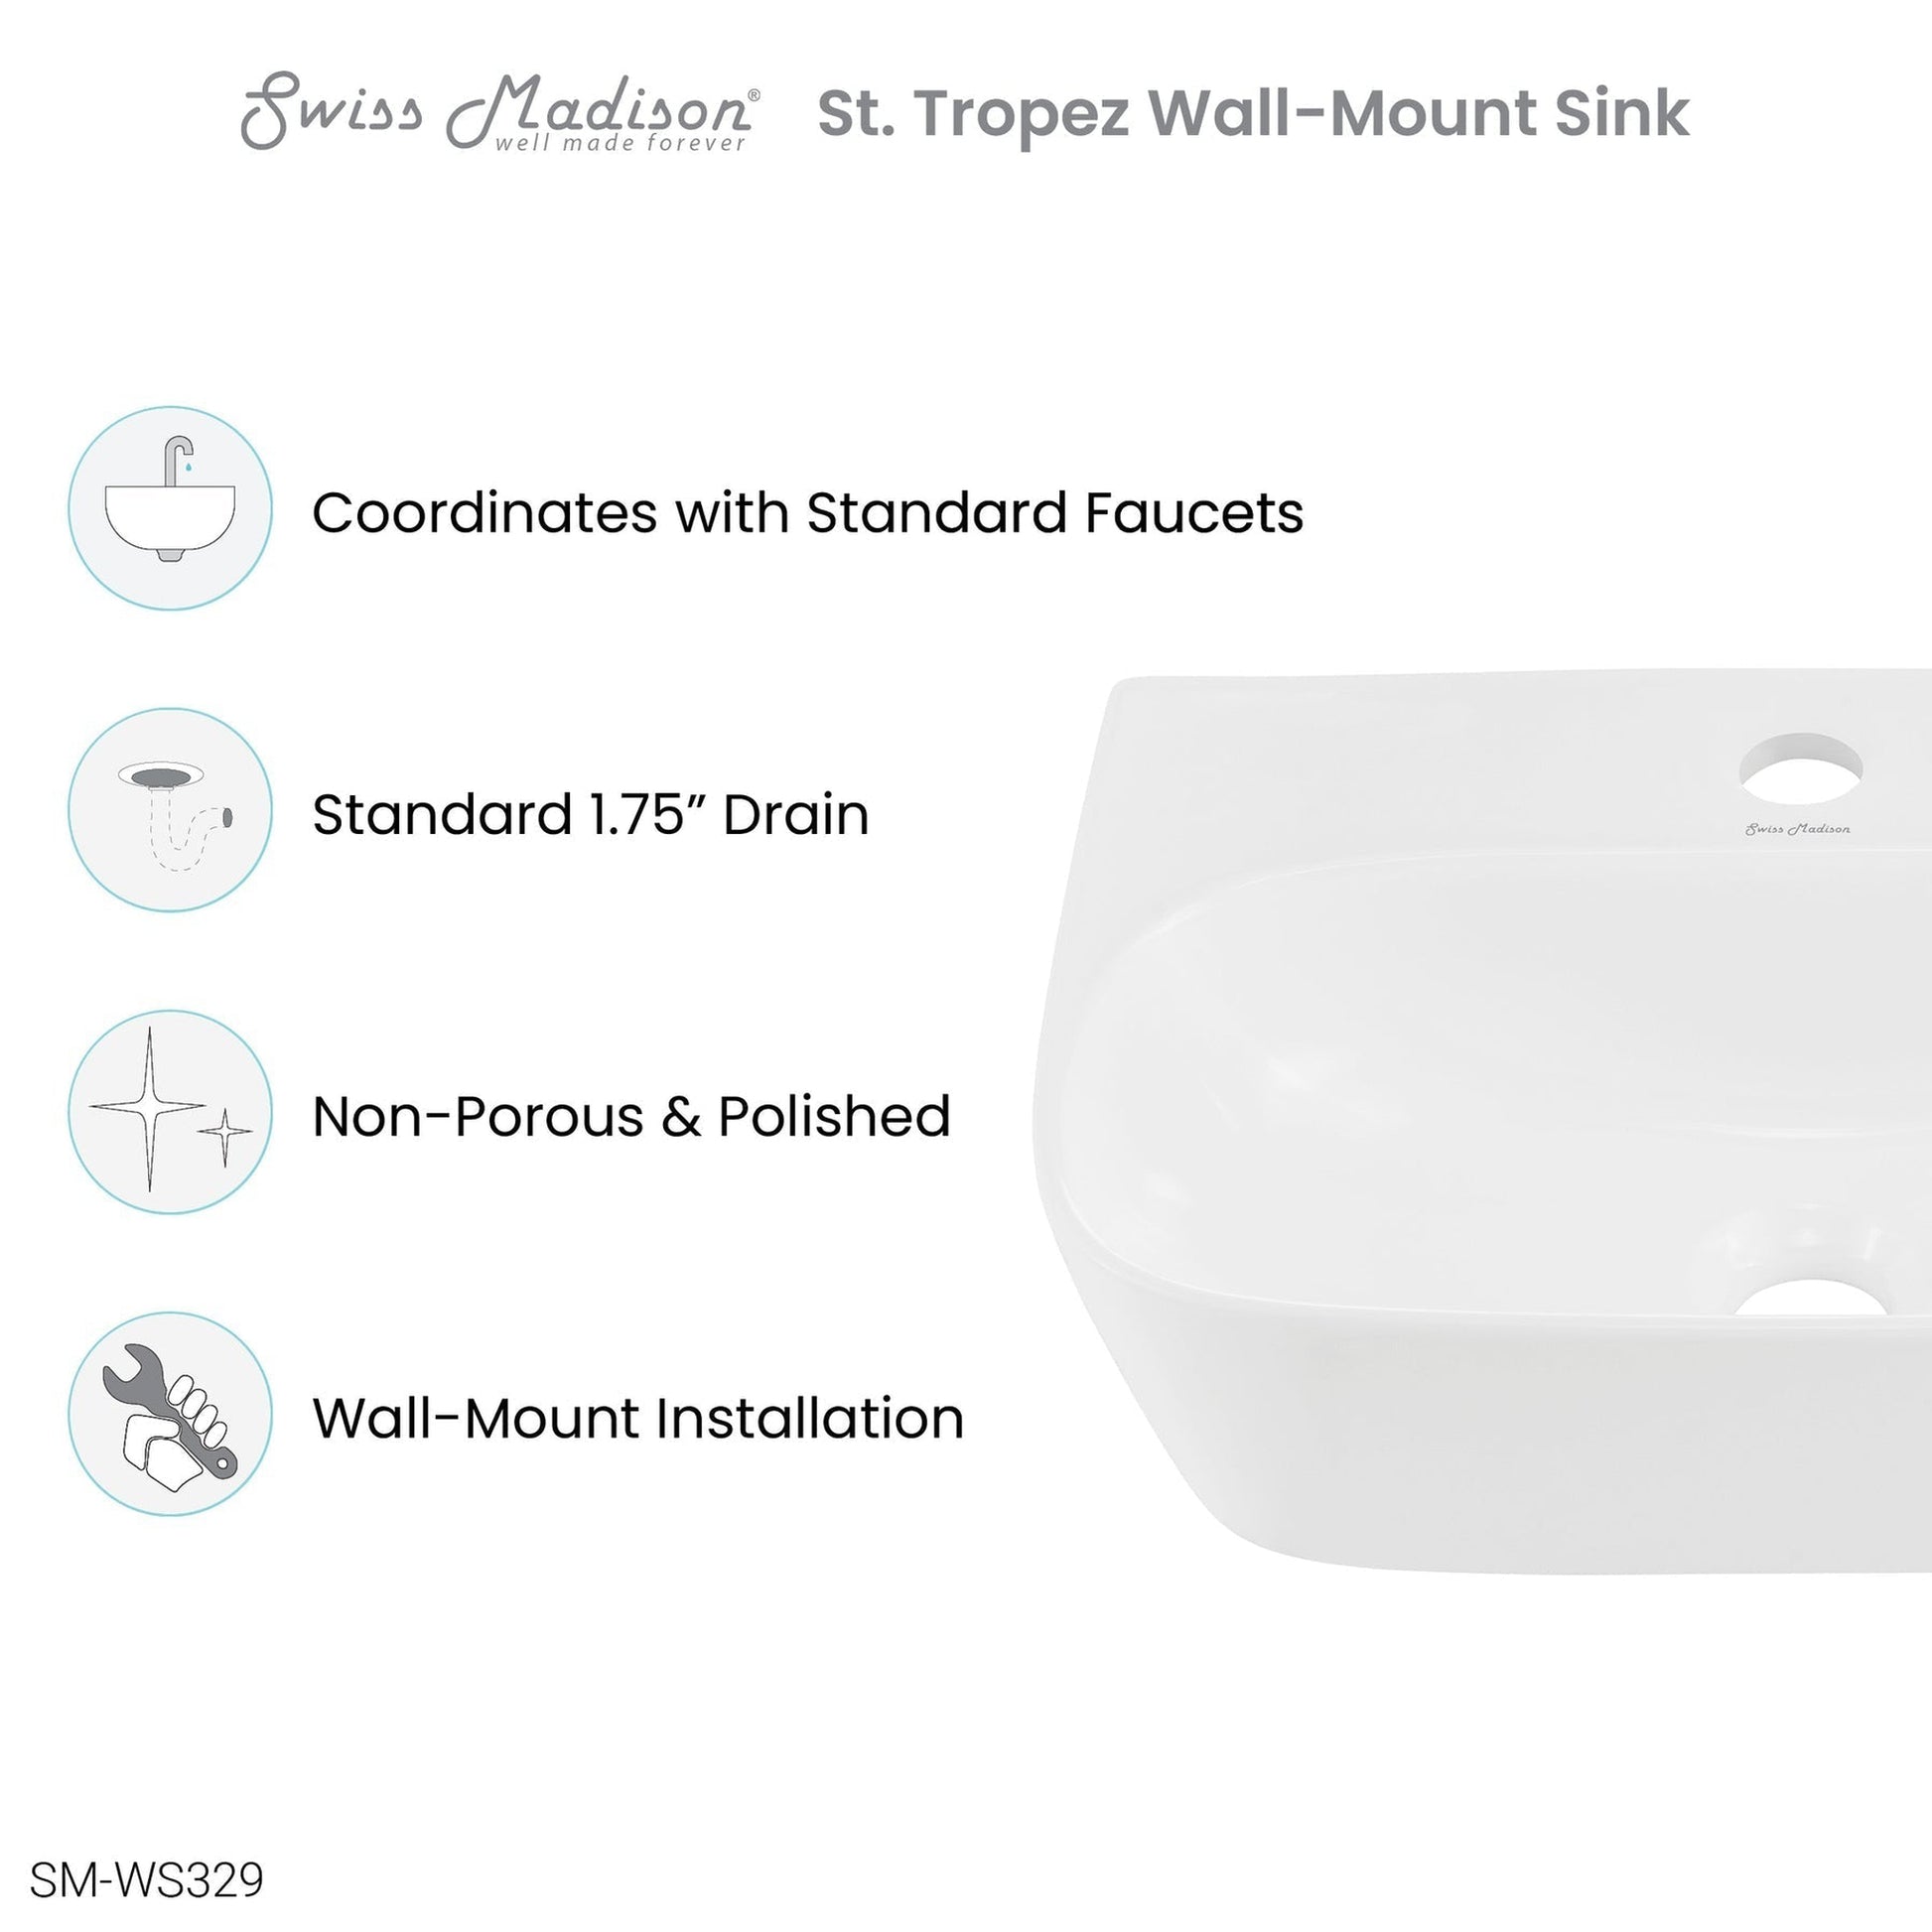 Swiss Madison Plaisir 17" x 12" Rectangular White Ceramic Wall-Hung Bathroom Sink With Single Hole Faucet